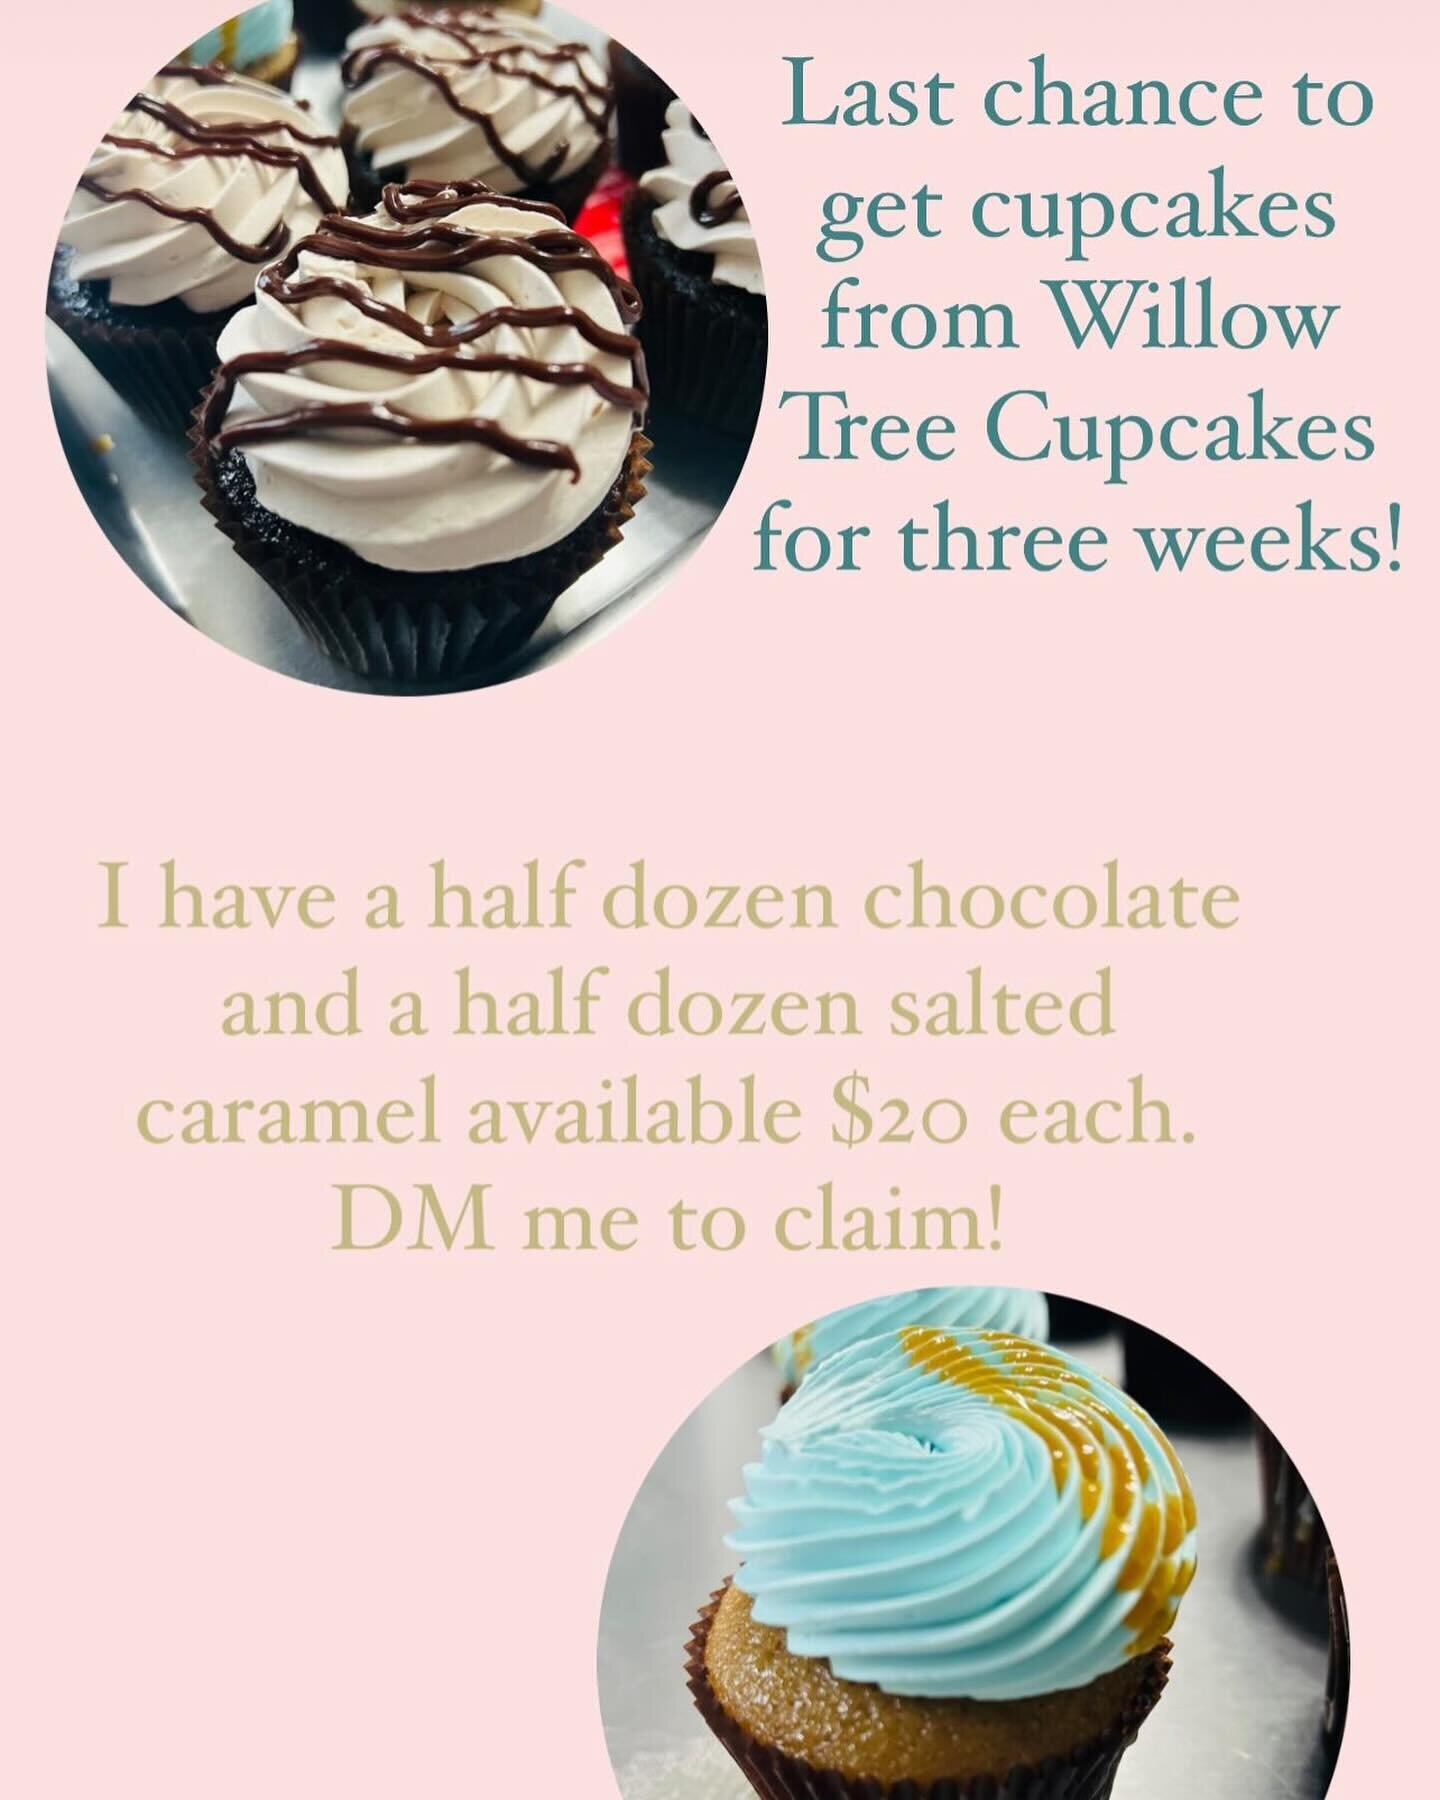 Who is craving Willow Tree Cupcakes?! Last chance to get cupcakes for THREE WEEKS!! 🚨Not a drill people! 🚨